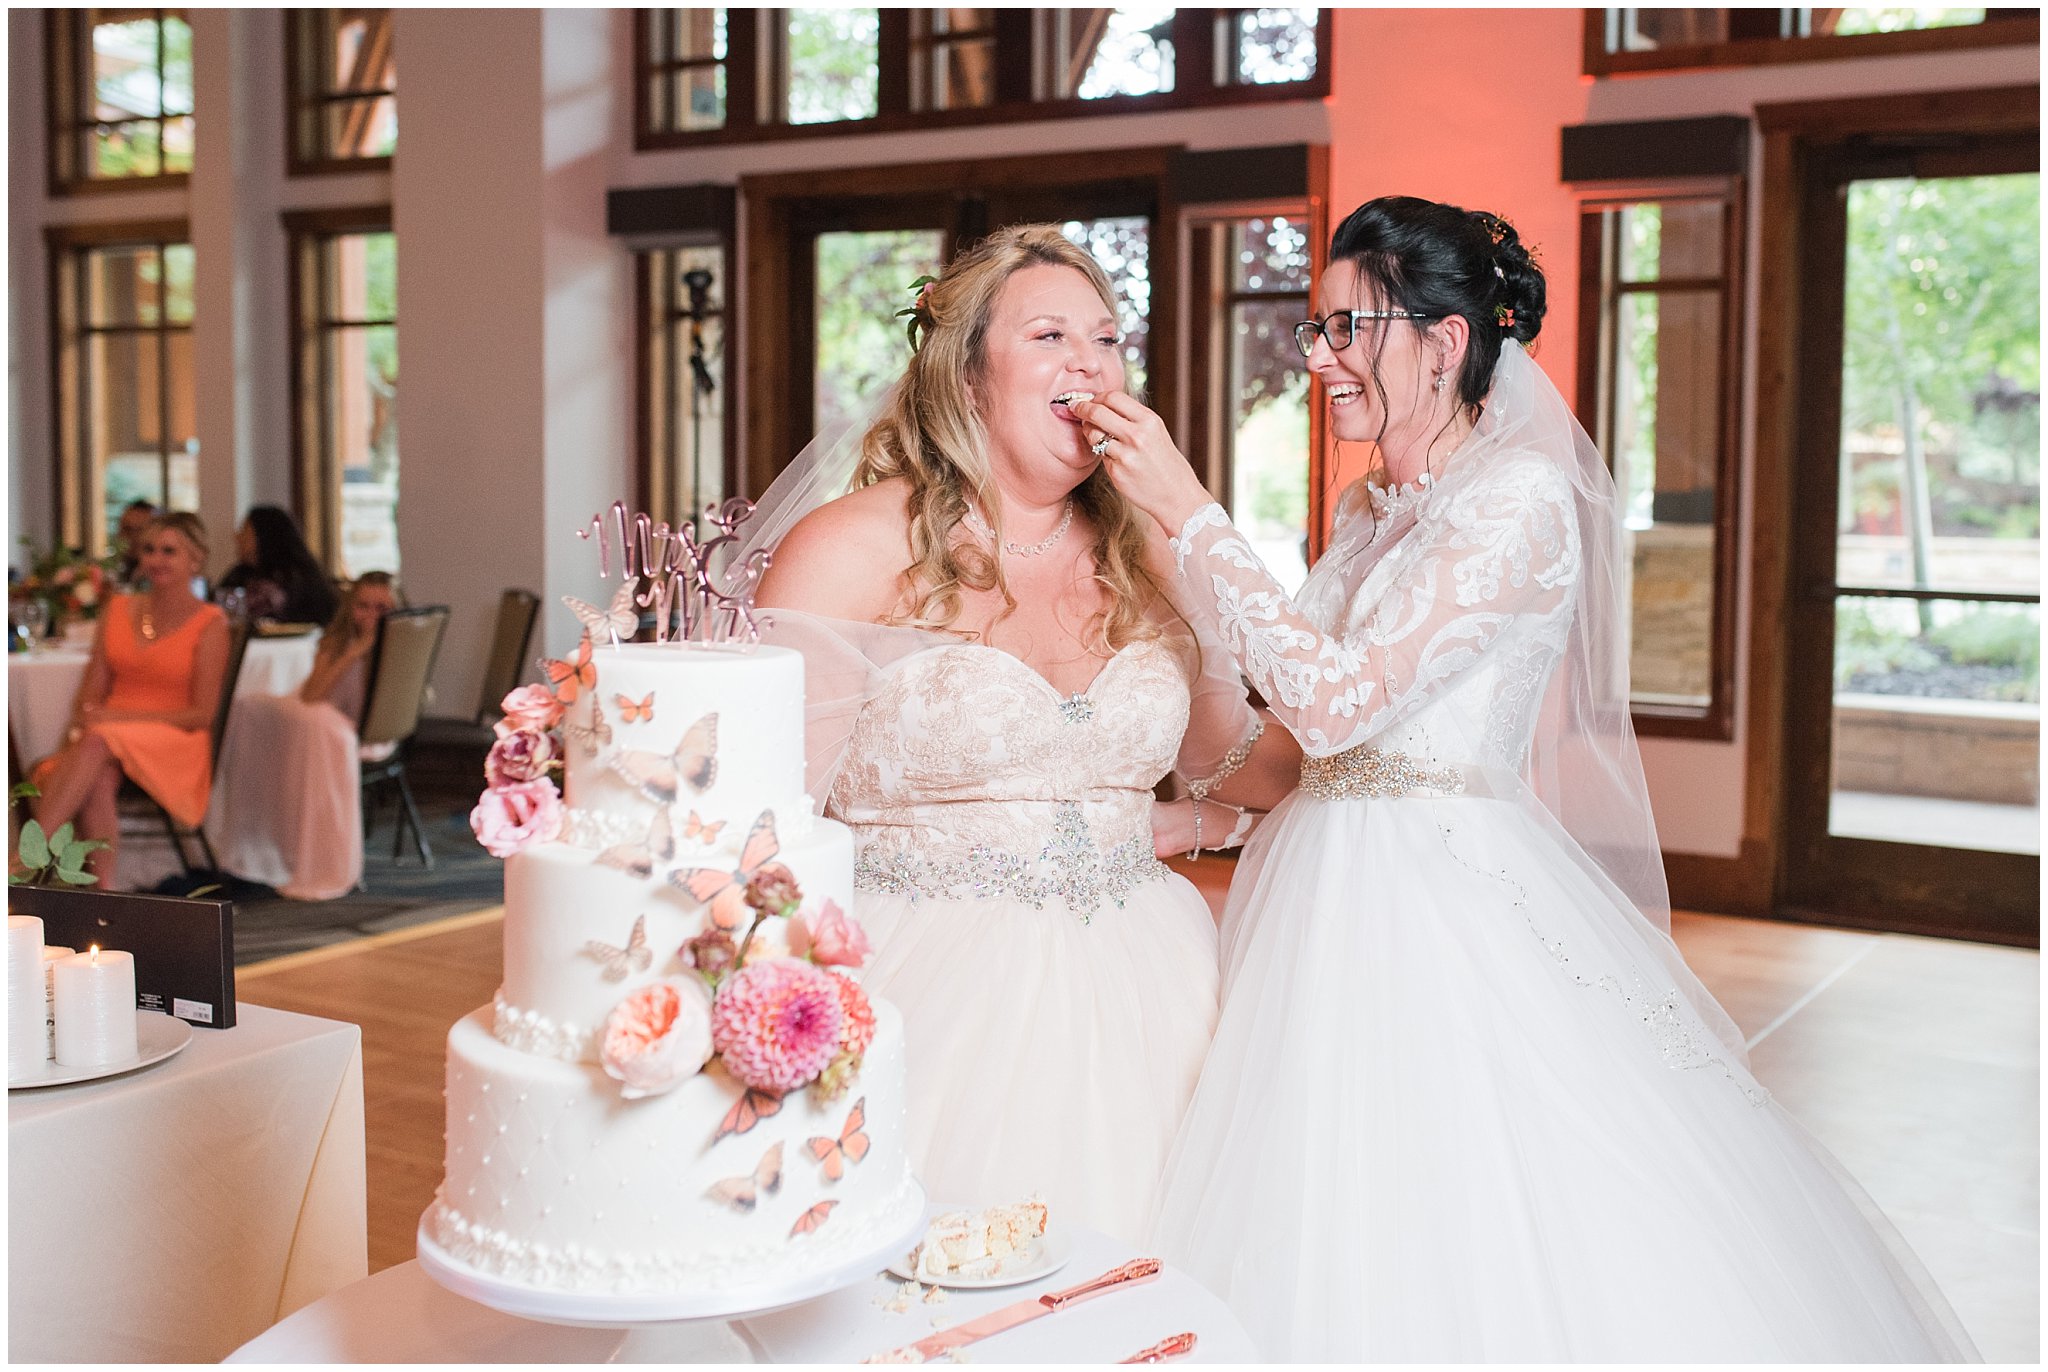 White wedding cake with butterflies and sunset colors of pink and orange | Park City Wedding at the Hyatt Centric | Jessie and Dallin Photography